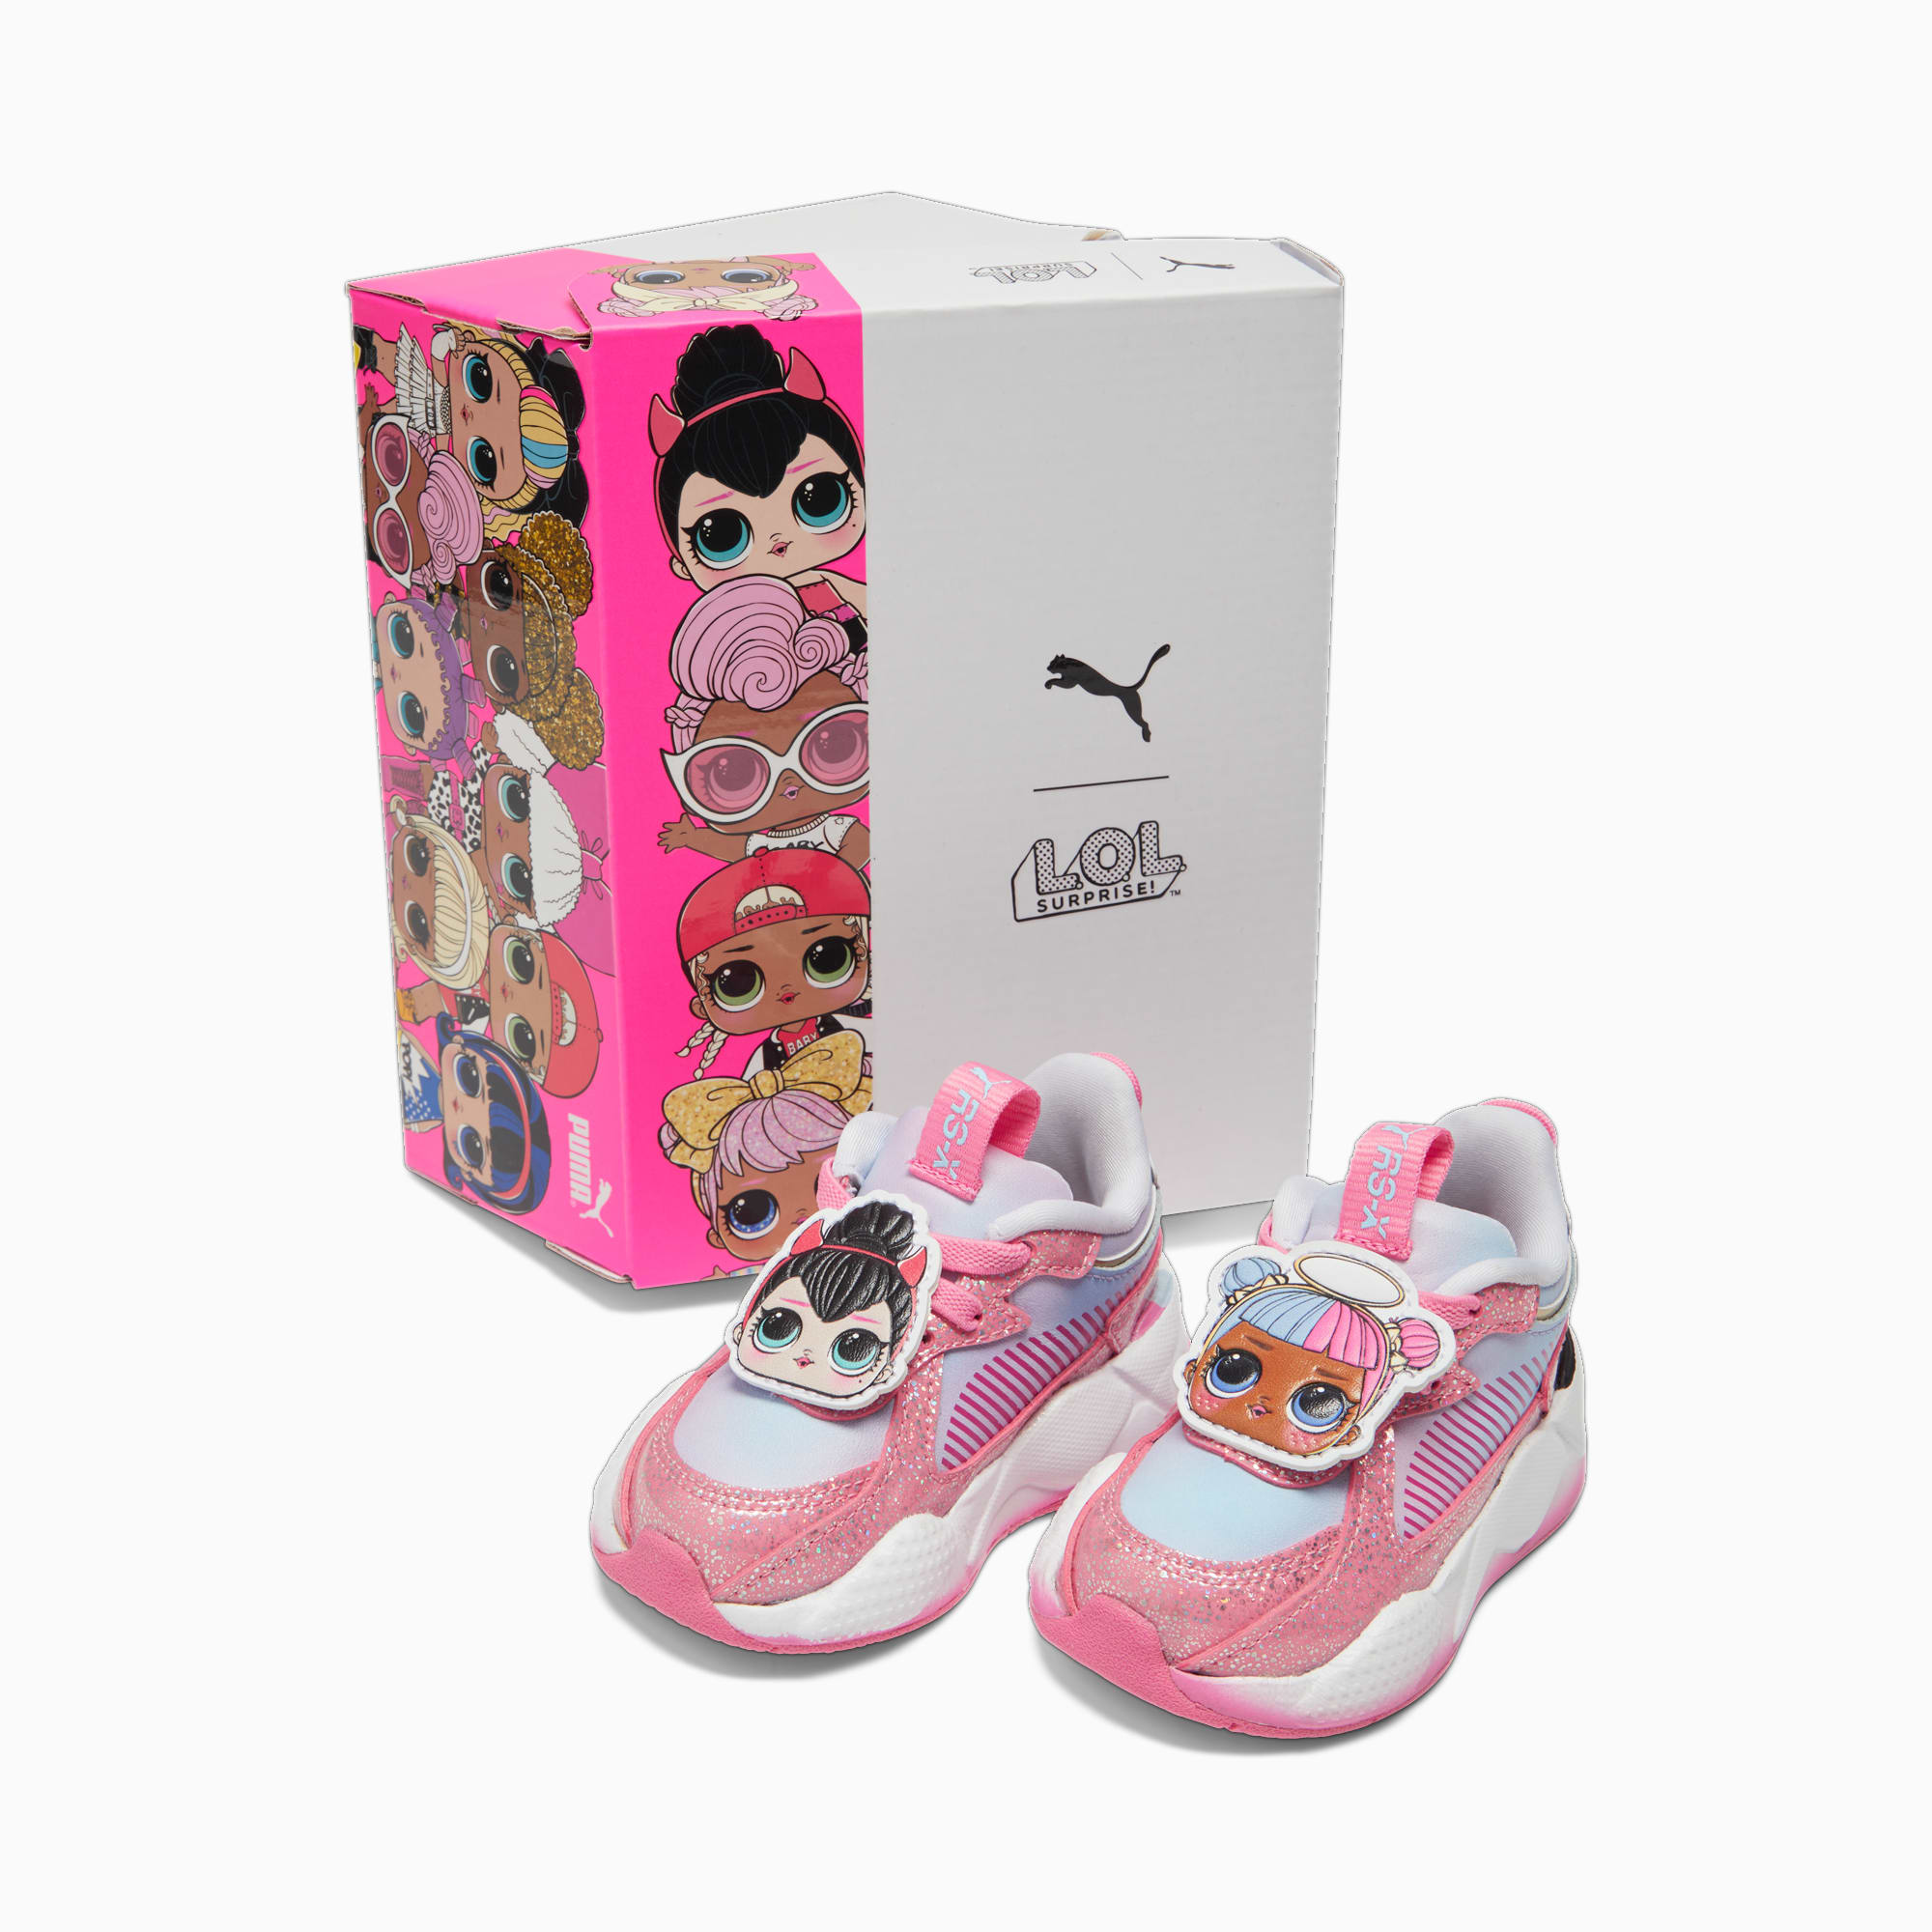 PUMA X Lol Surprise Rs-x Toddlers' Sneakers, Strawberry Burst/Silver Sky/White